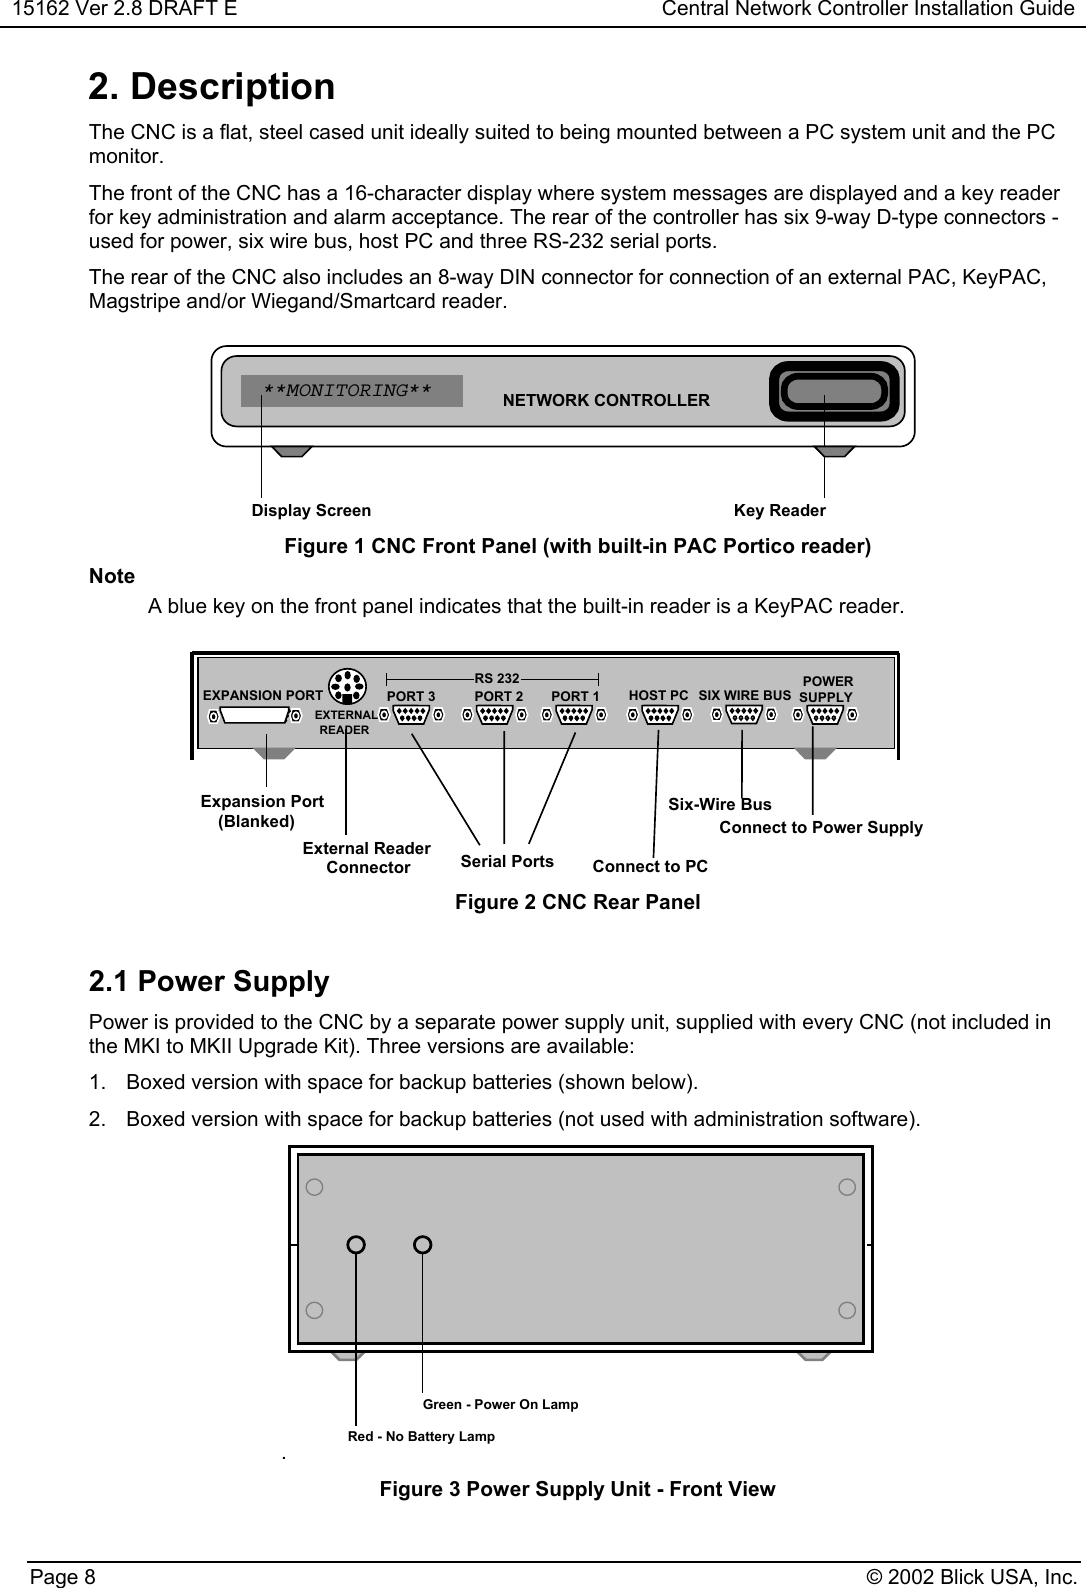 15162 Ver 2.8 DRAFT E Central Network Controller Installation GuidePage 8 © 2002 Blick USA, Inc.2. DescriptionThe CNC is a flat, steel cased unit ideally suited to being mounted between a PC system unit and the PCmonitor.The front of the CNC has a 16-character display where system messages are displayed and a key readerfor key administration and alarm acceptance. The rear of the controller has six 9-way D-type connectors -used for power, six wire bus, host PC and three RS-232 serial ports.The rear of the CNC also includes an 8-way DIN connector for connection of an external PAC, KeyPAC,Magstripe and/or Wiegand/Smartcard reader.NETWORK CONTROLLER**MONITORING**Key ReaderDisplay ScreenFigure 1 CNC Front Panel (with built-in PAC Portico reader)NoteA blue key on the front panel indicates that the built-in reader is a KeyPAC reader.Expansion PortExternal ReaderConnector(Blanked)PORT 3RS 232PORT 2 PORT 1 HOST PC SIX WIRE BUSPOWERSix-Wire BusConnect to PCSerial PortsConnect to Power SupplySUPPLYEXTERNALREADEREXPANSION PORTFigure 2 CNC Rear Panel2.1 Power SupplyPower is provided to the CNC by a separate power supply unit, supplied with every CNC (not included inthe MKI to MKII Upgrade Kit). Three versions are available:1.  Boxed version with space for backup batteries (shown below).2.  Boxed version with space for backup batteries (not used with administration software)..Green - Power On LampRed - No Battery LampFigure 3 Power Supply Unit - Front View